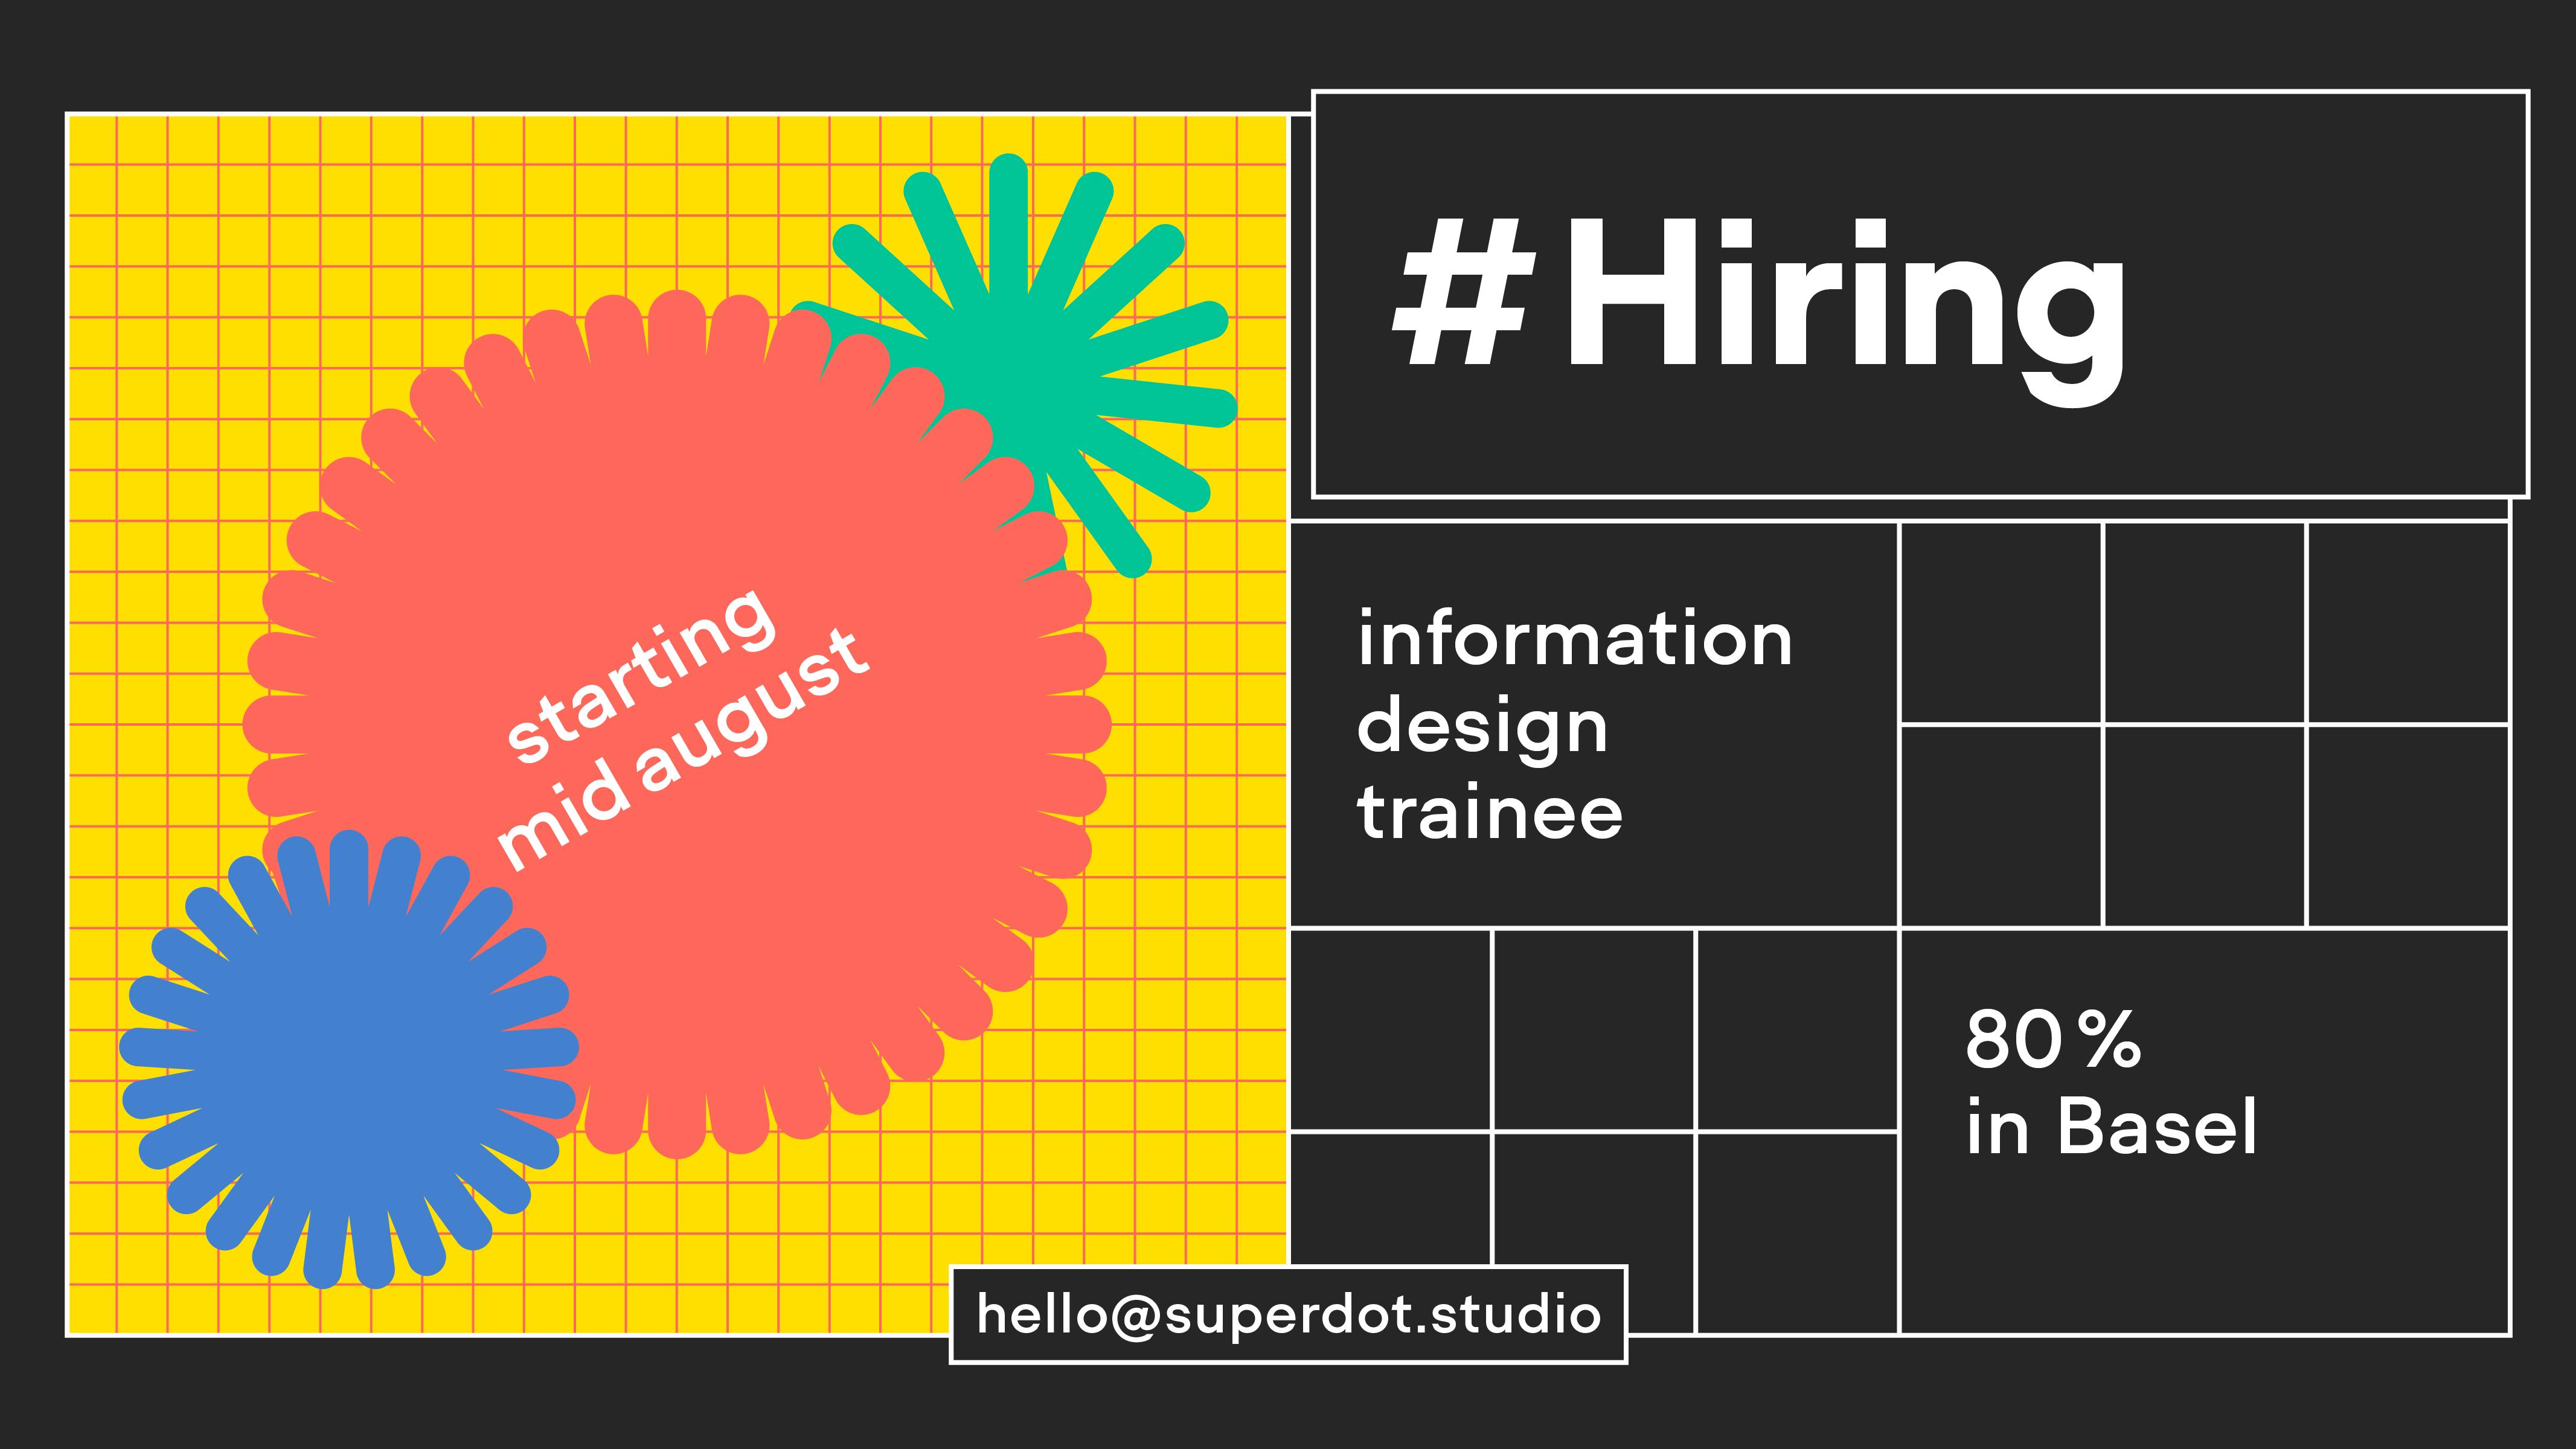 New job at superdot – we are searching for a new trainee